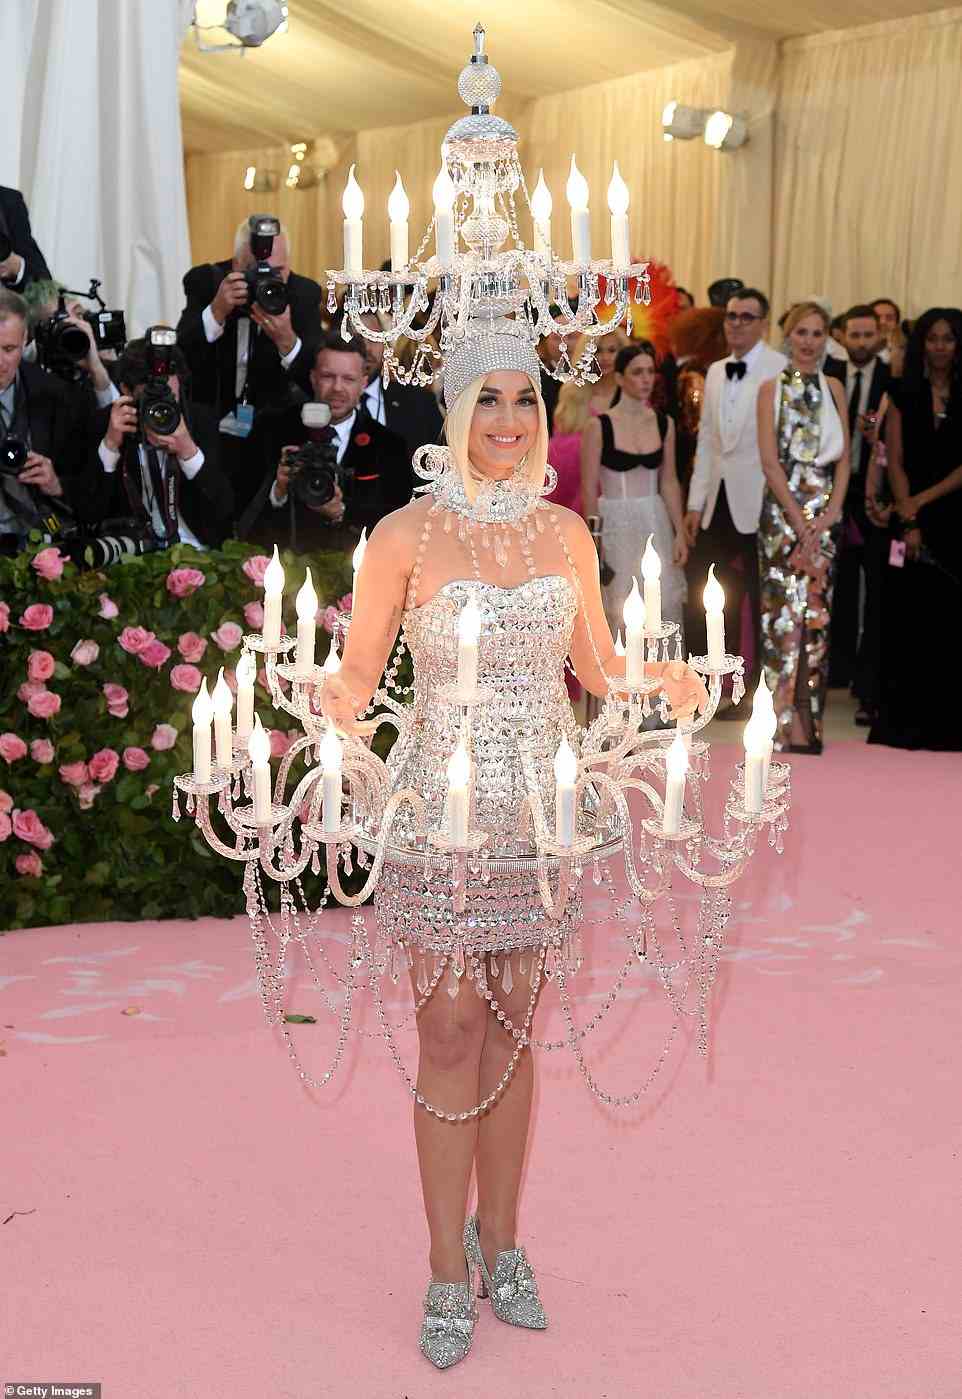 The Met Gala was especially over-the-top in 2019 in keeping with the 'Camp' theme - and few do camp quite like Katy Perry, who worked with Jeremy Scott for Moschino to create this chandelier dress and matching headpiece